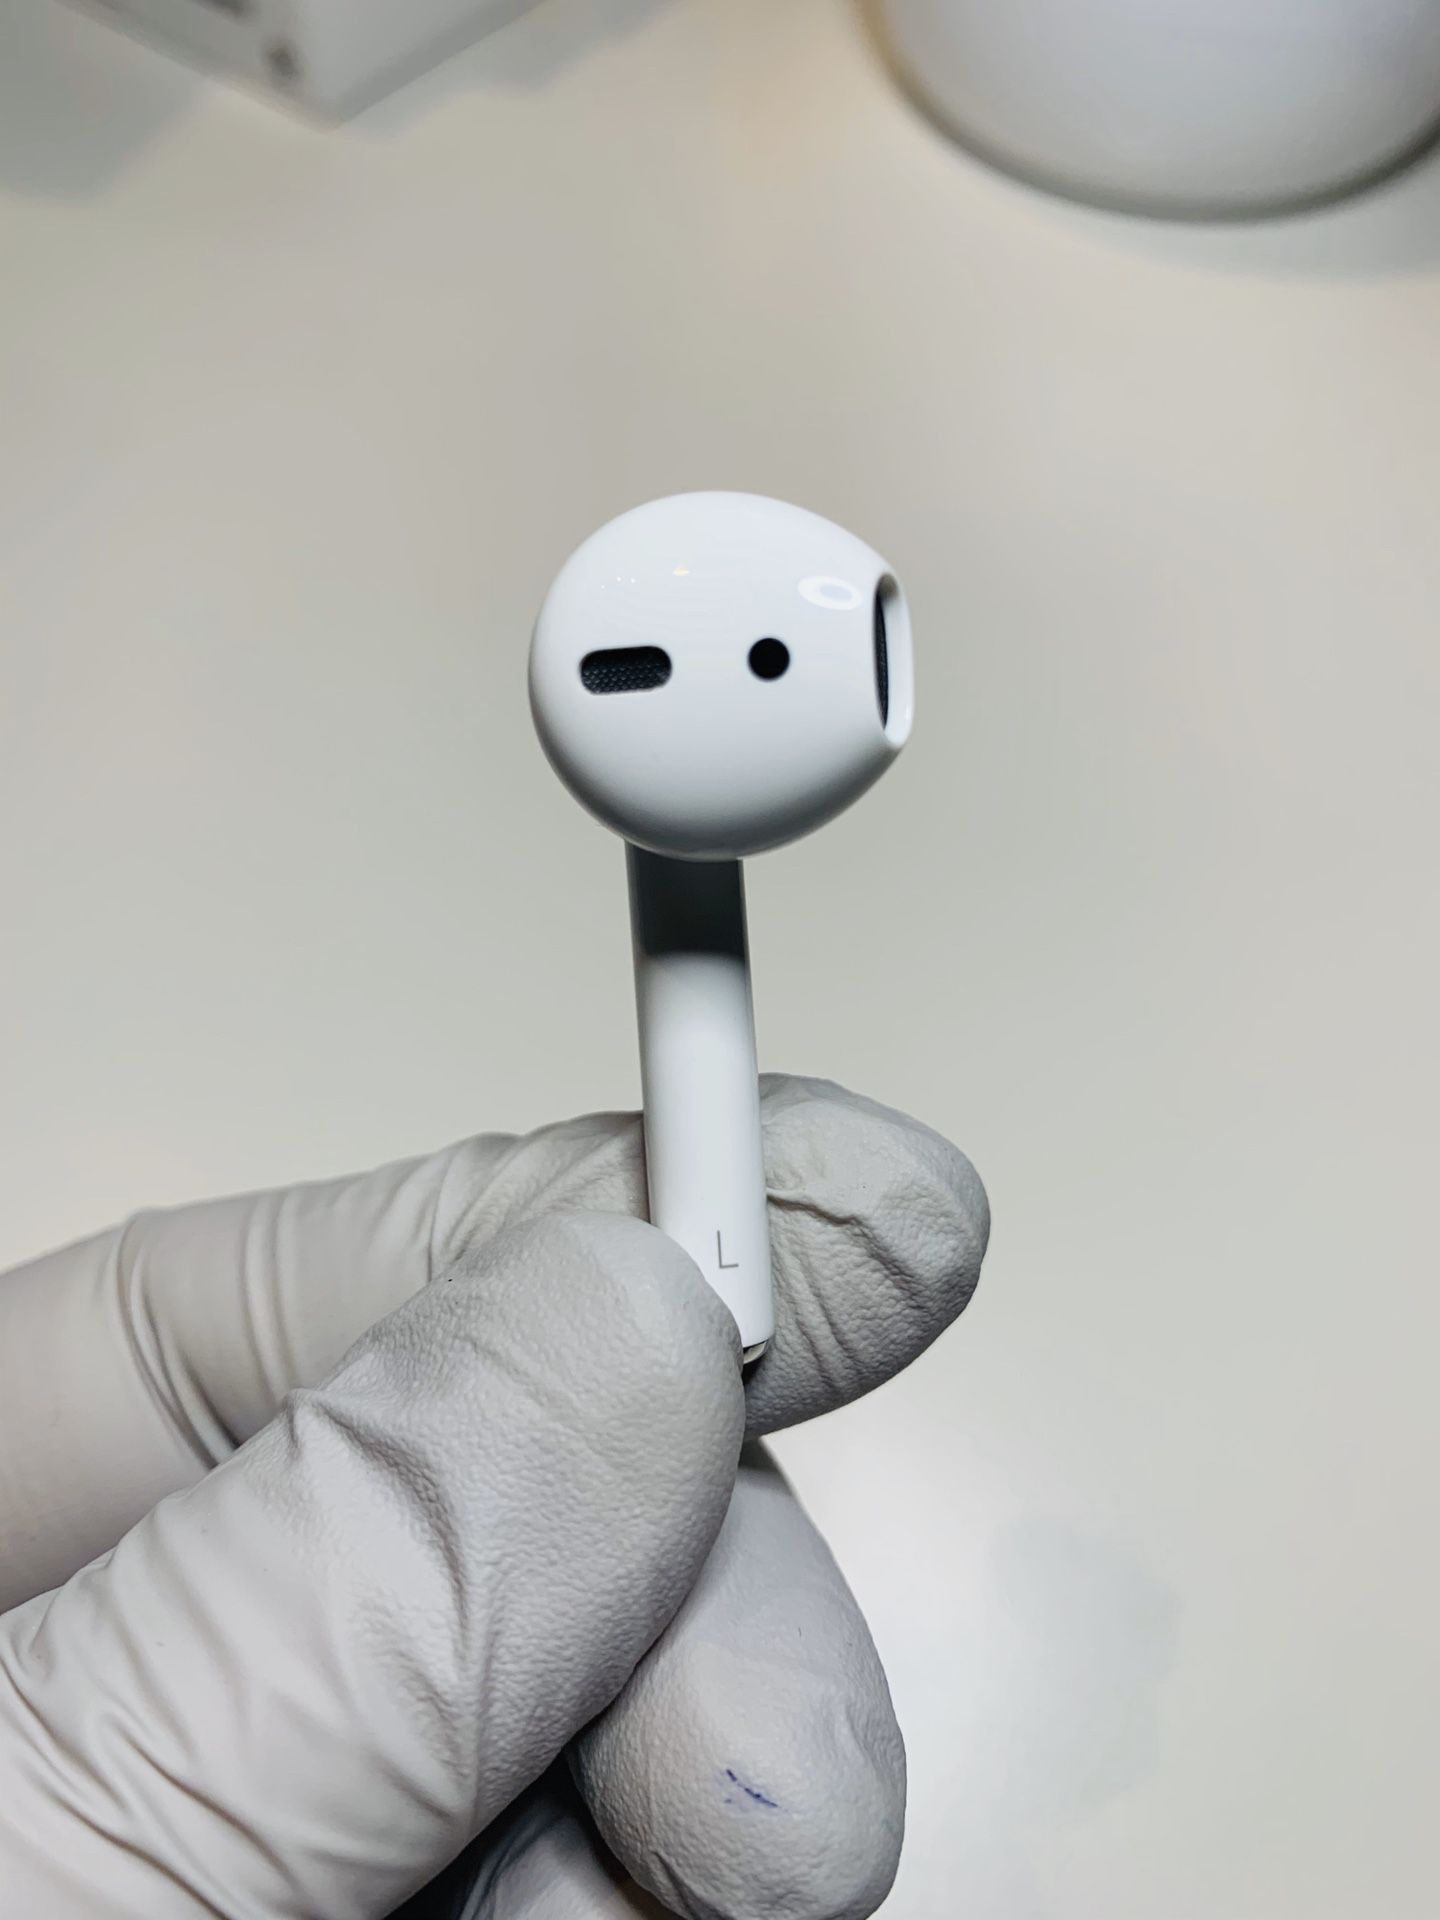 Apple Airpods Single ( Left AirPod Only ) Gen 2 Replacement - Like New - Fully Tested PRICE FIRM